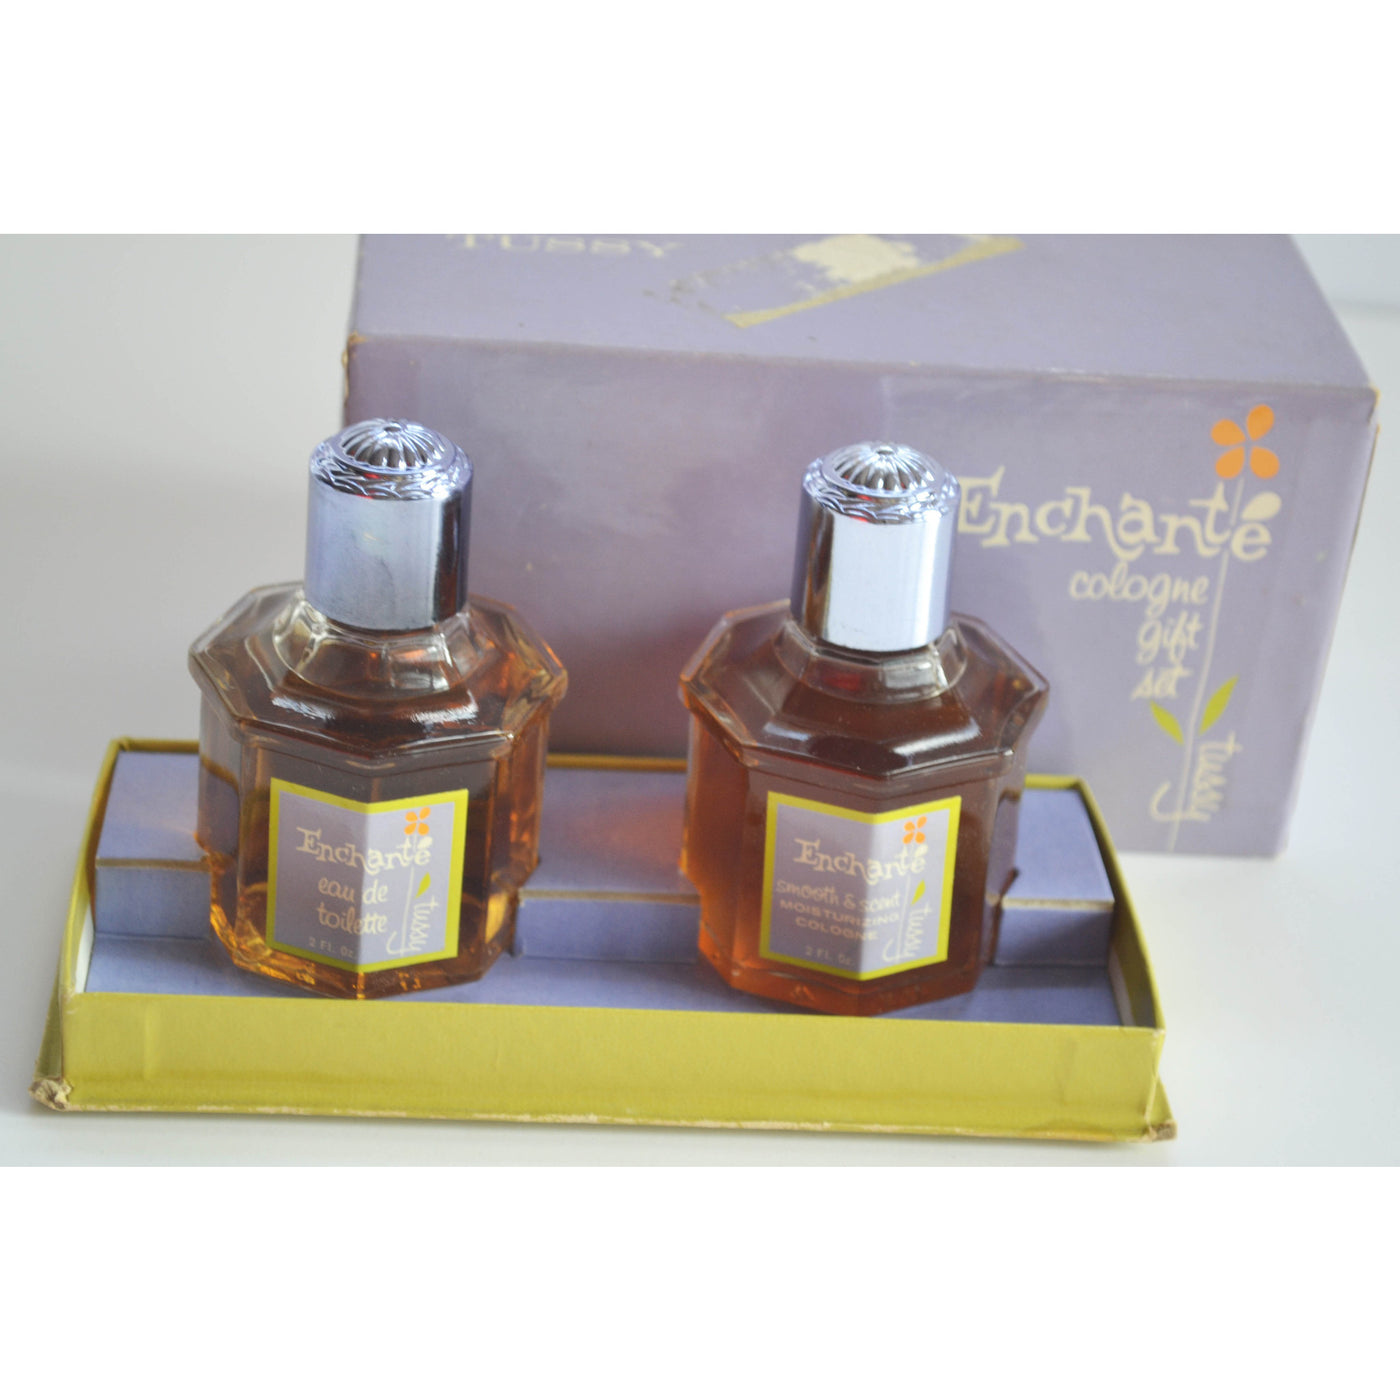 Vintage Enchante Cologne Gift Set By Tussy